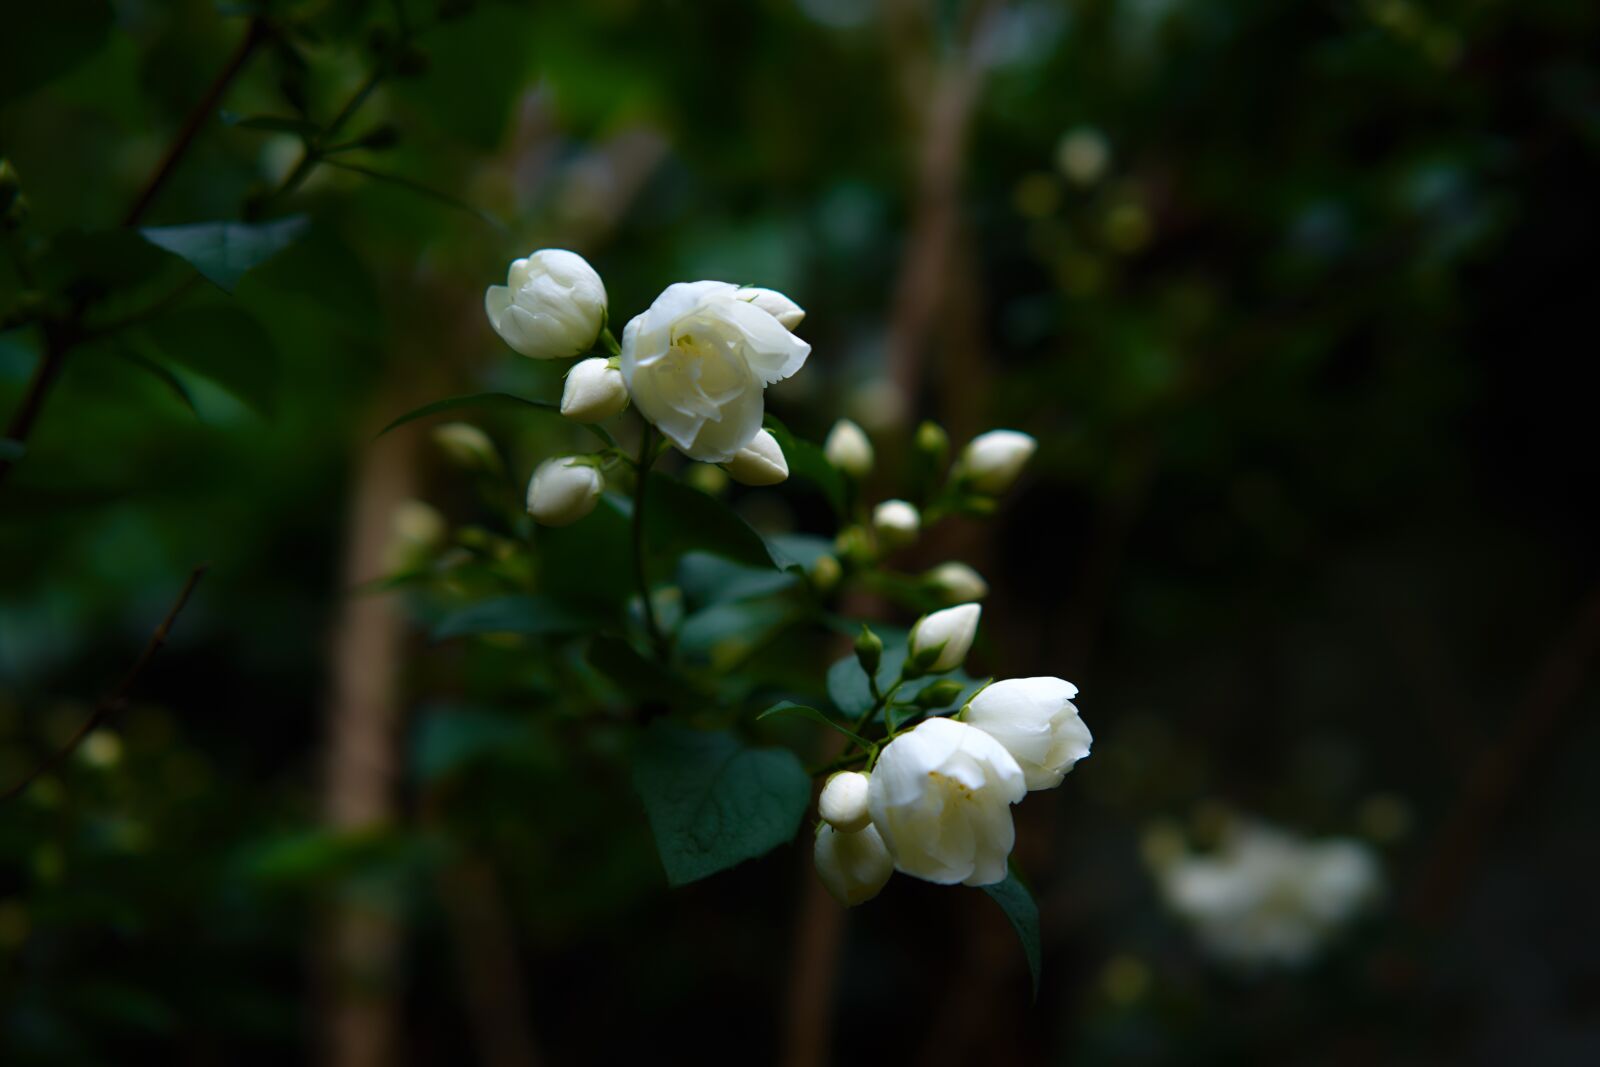 Sony a7 sample photo. Flower, garden, white flowers photography